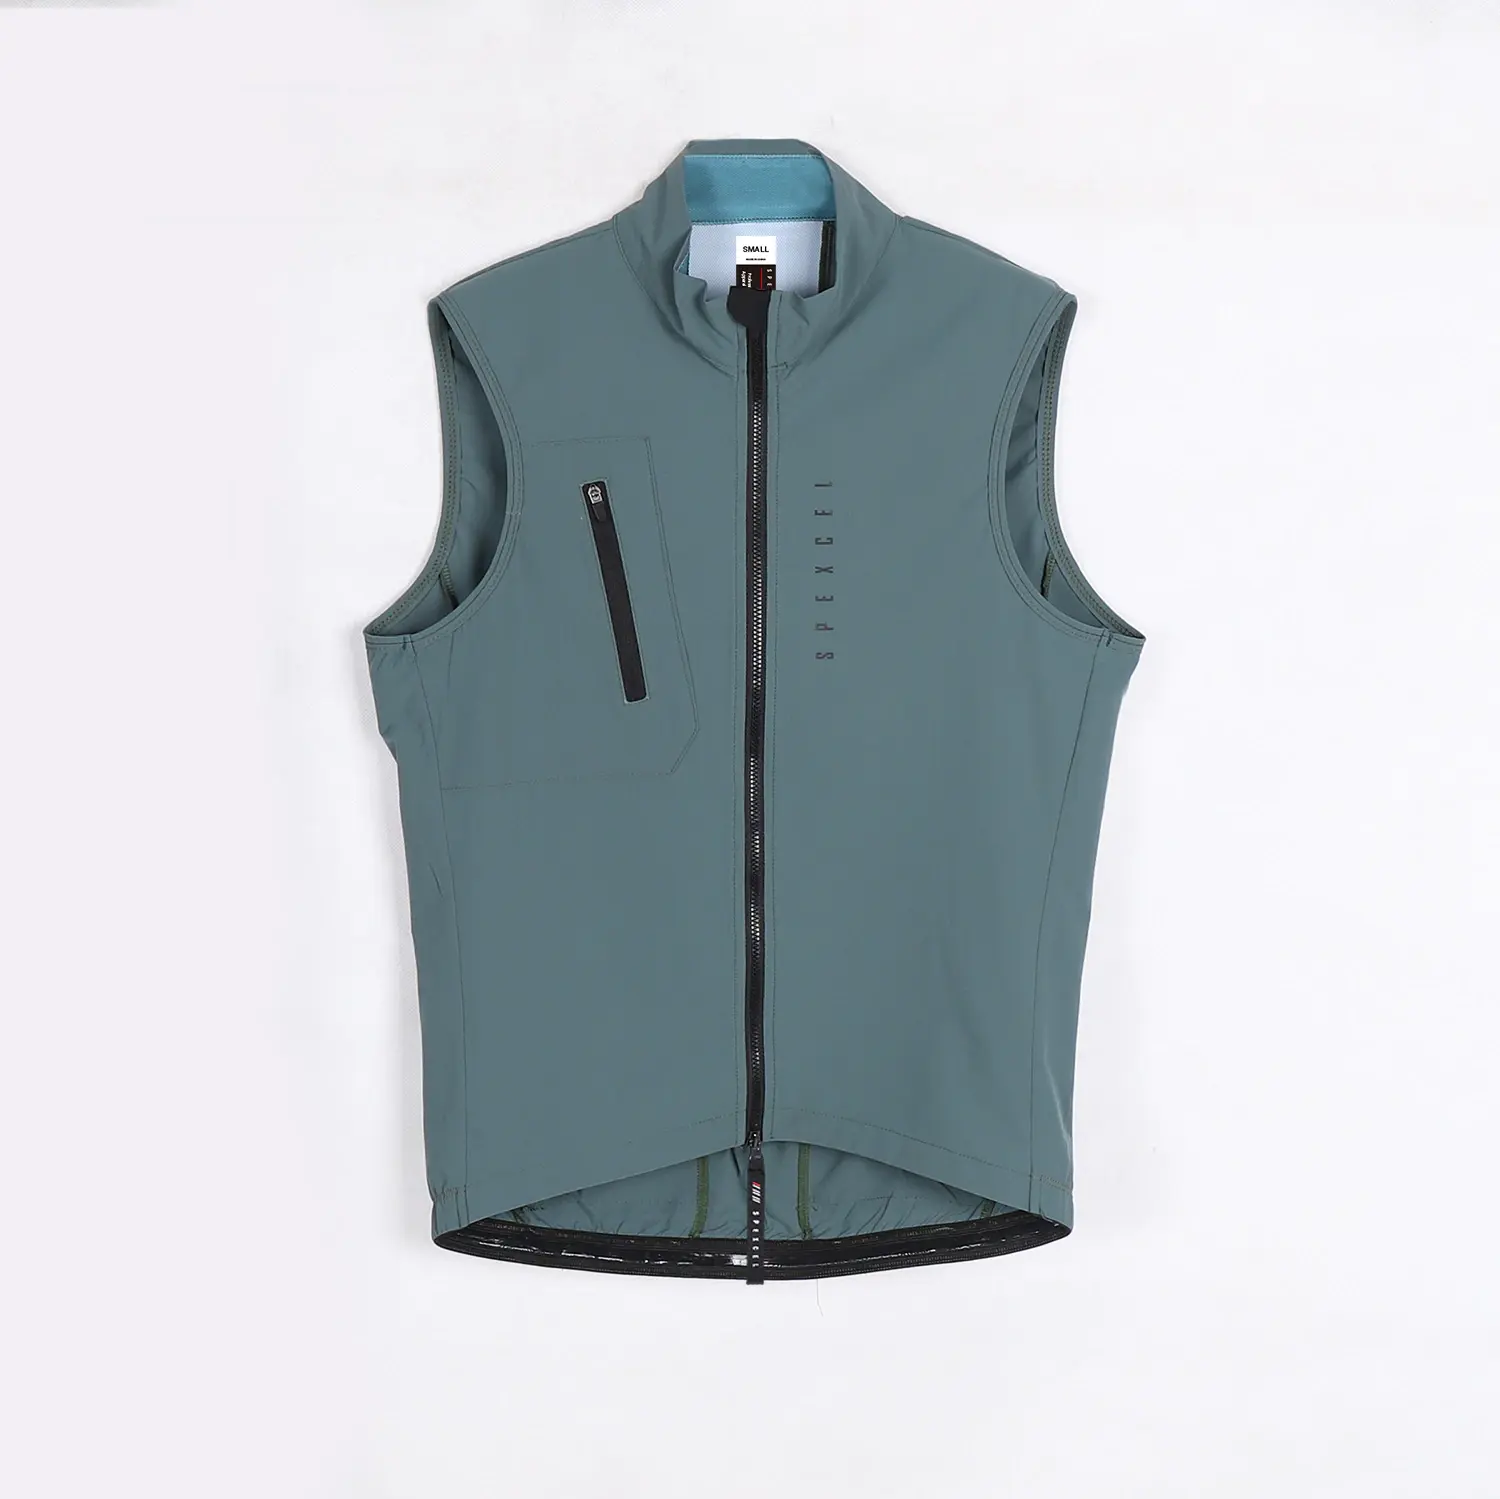 SPEXCEL 2022 All New Classic Light Windproof Vest Cycling Best Men's Wind Gilet New Stretch fabric With Two Way Zipper